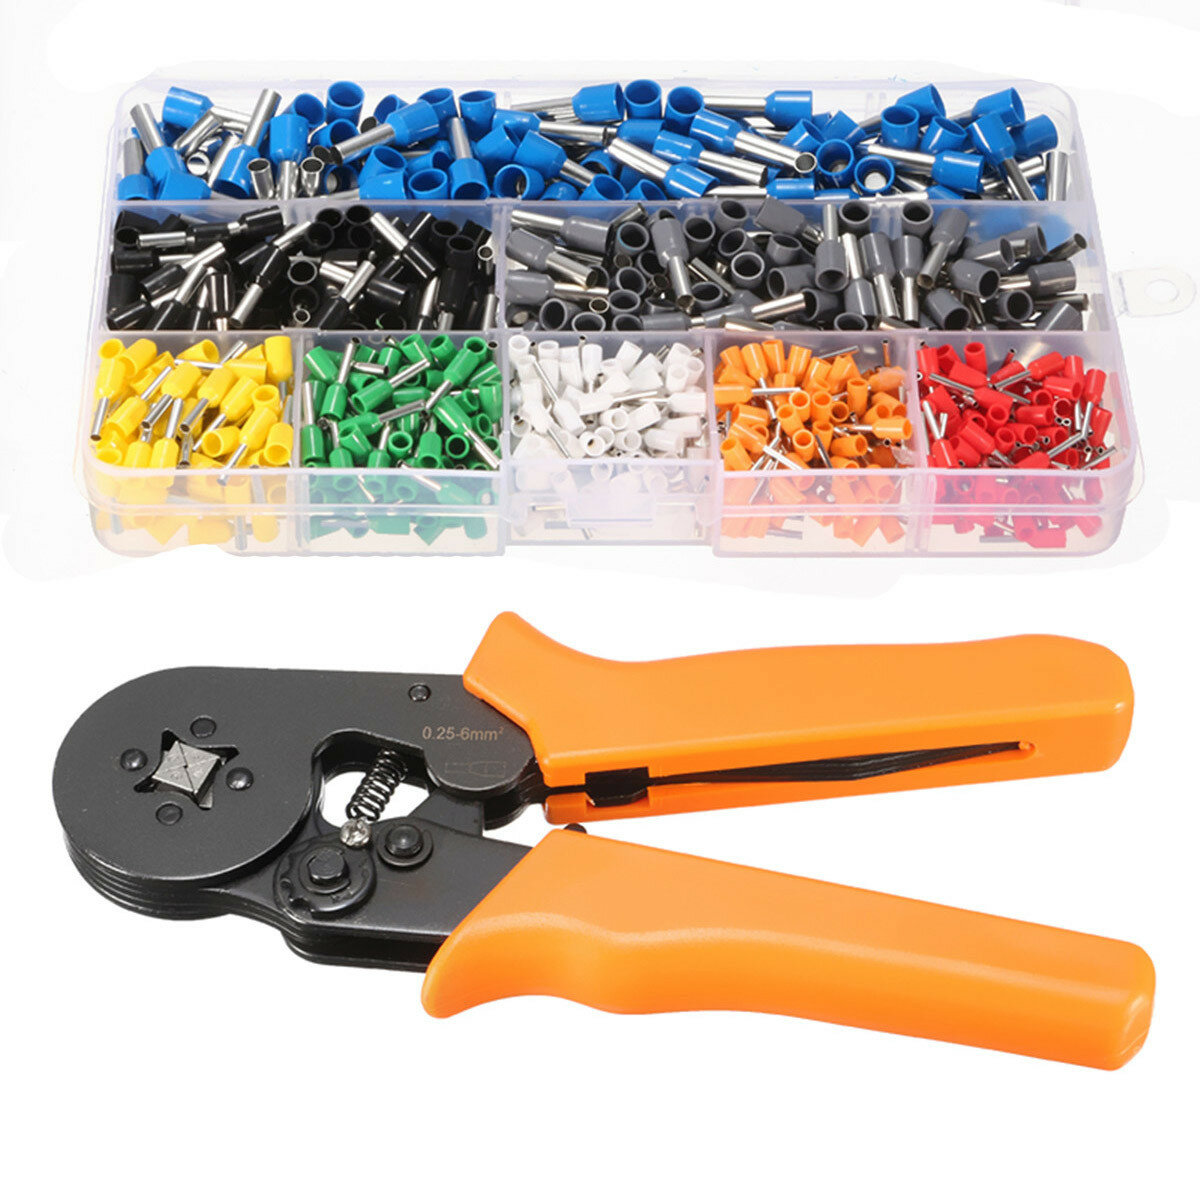 DANIU 23AWG to 10AWG Self Adjusting Ratcheting Ferrule Crimper Plier Tool with 800pcs Connector Term